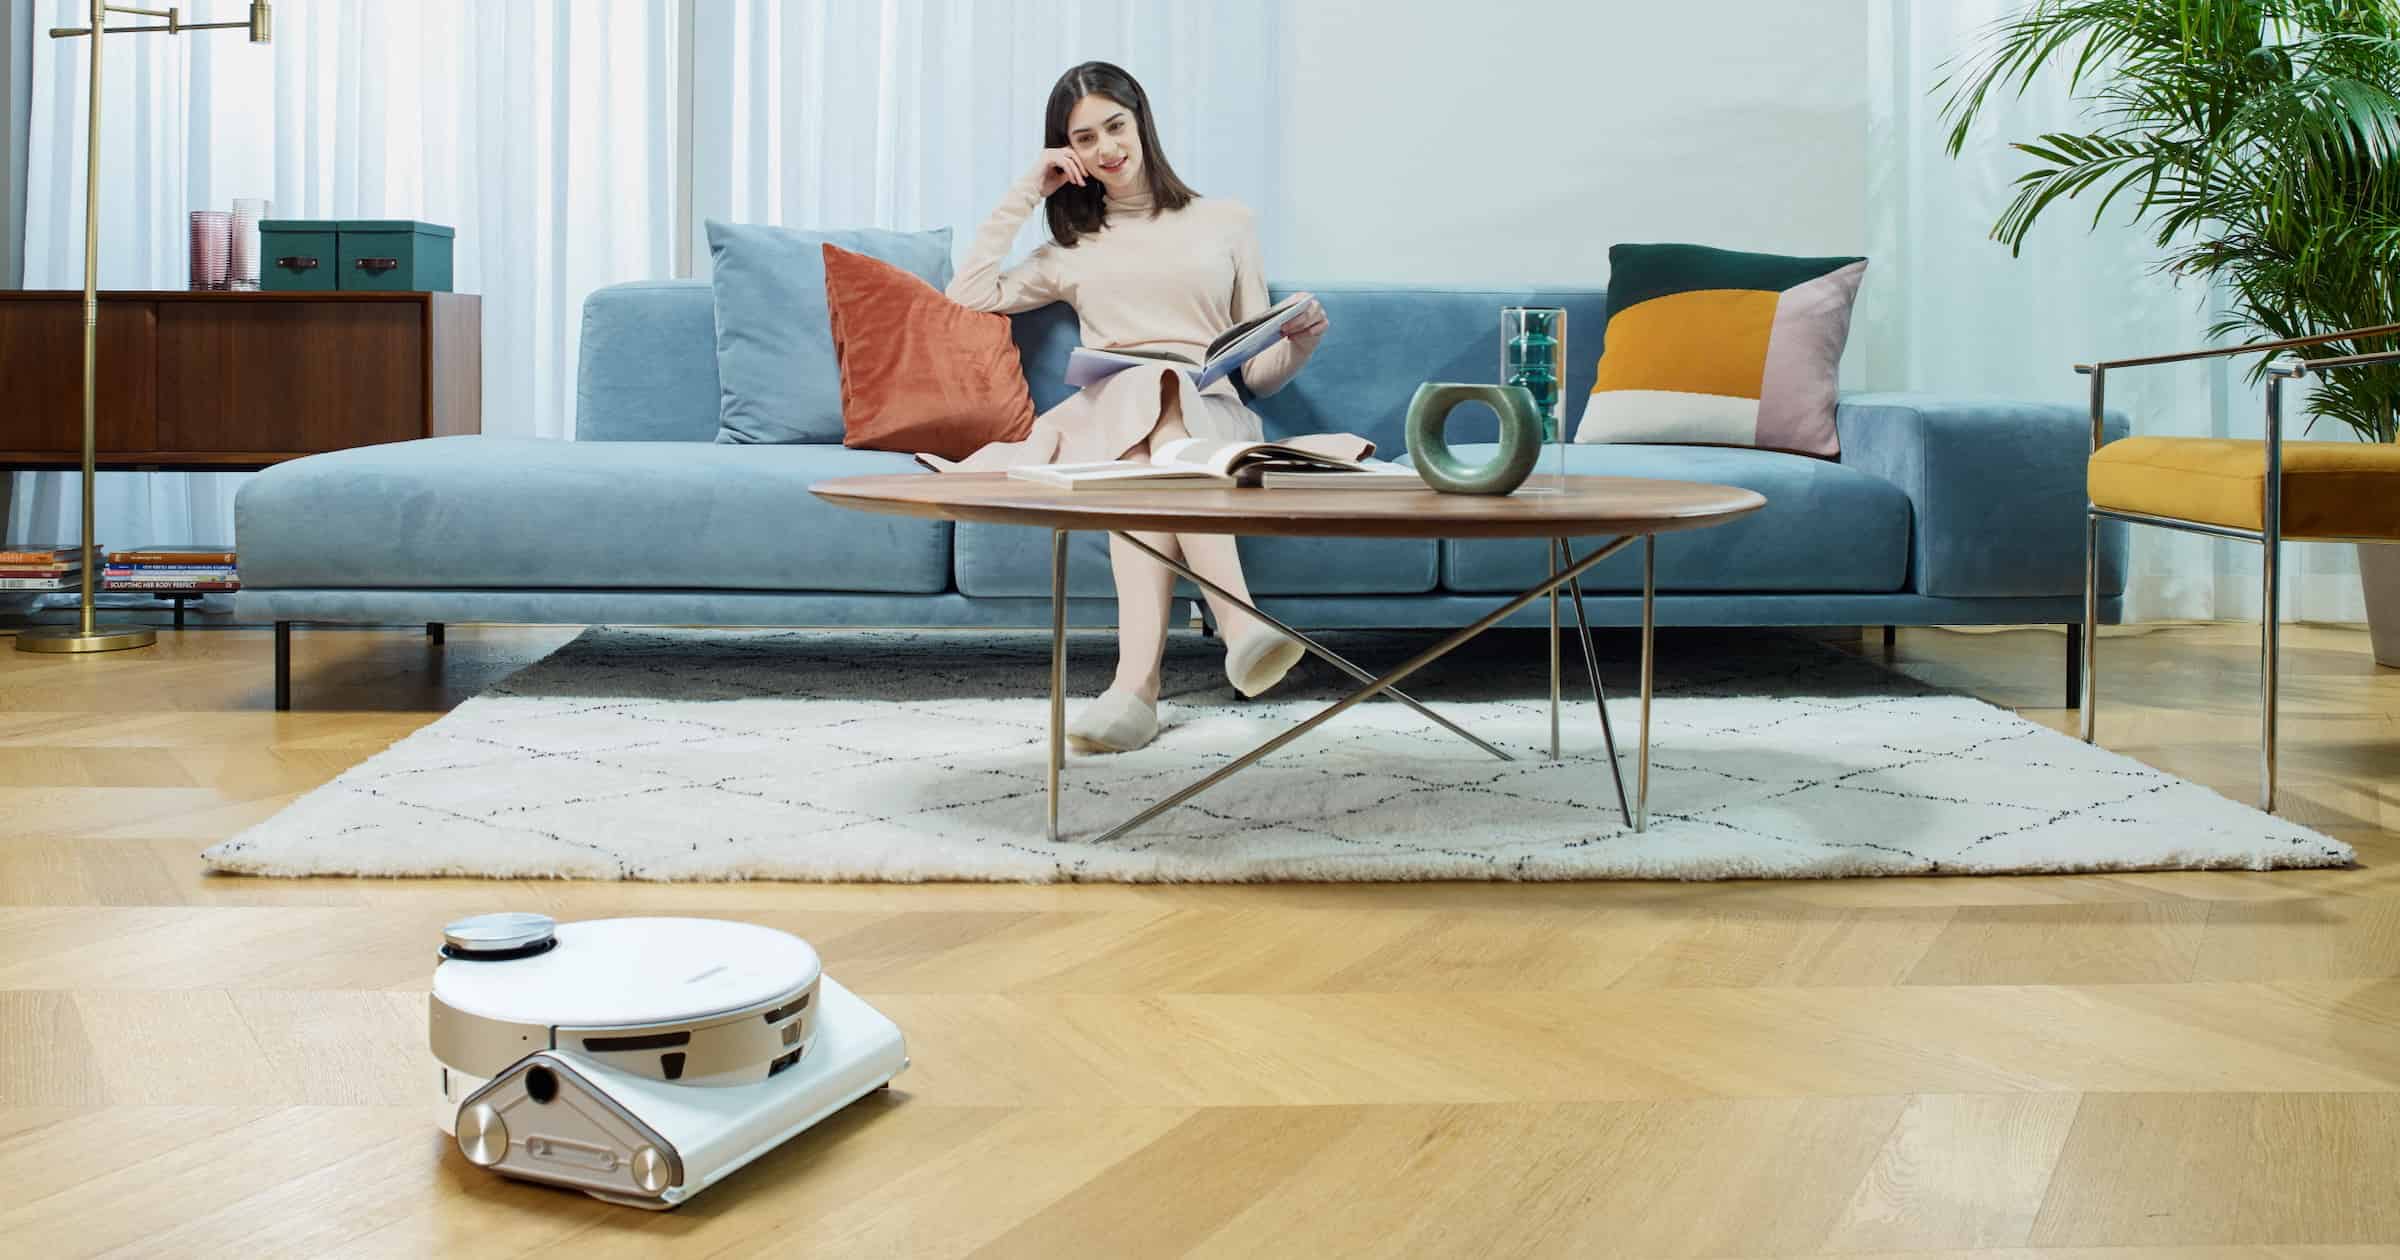 Samsung's JetBot 90 AI+, using robots in your home to better automate housekeeping